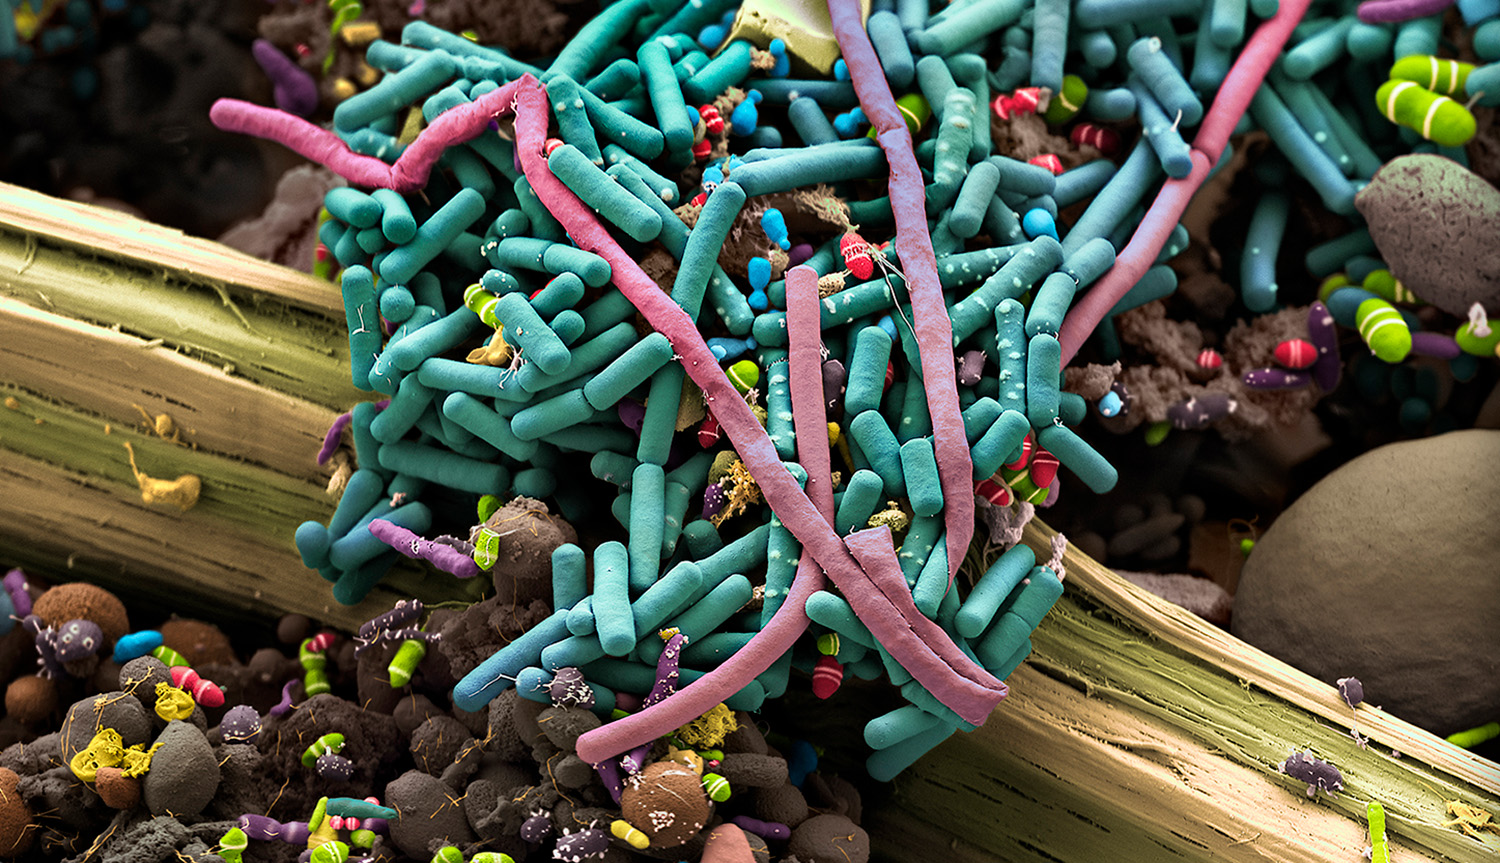 Colorized scanning electron microscope image of excrement shows a pale green piece of plant fiber covered by tiny microbes colored teal, purple, red, green, brown and more. 